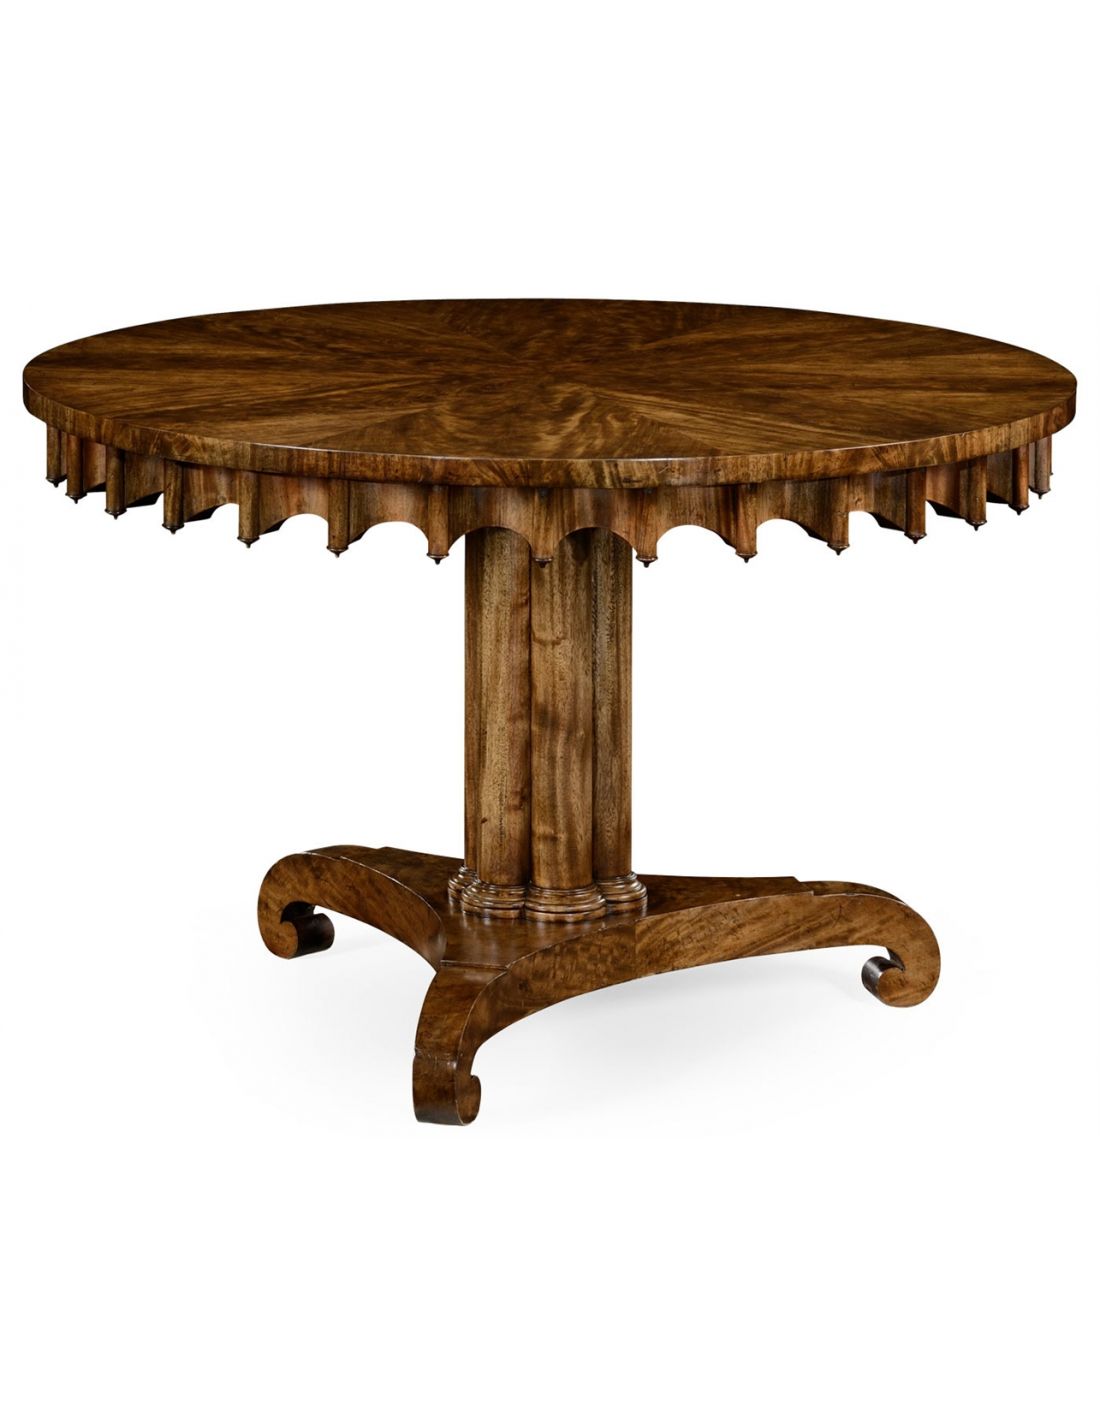 Dining Tables, high end dining rooms, luxury dining room sets. (3) High Dining Room Tables